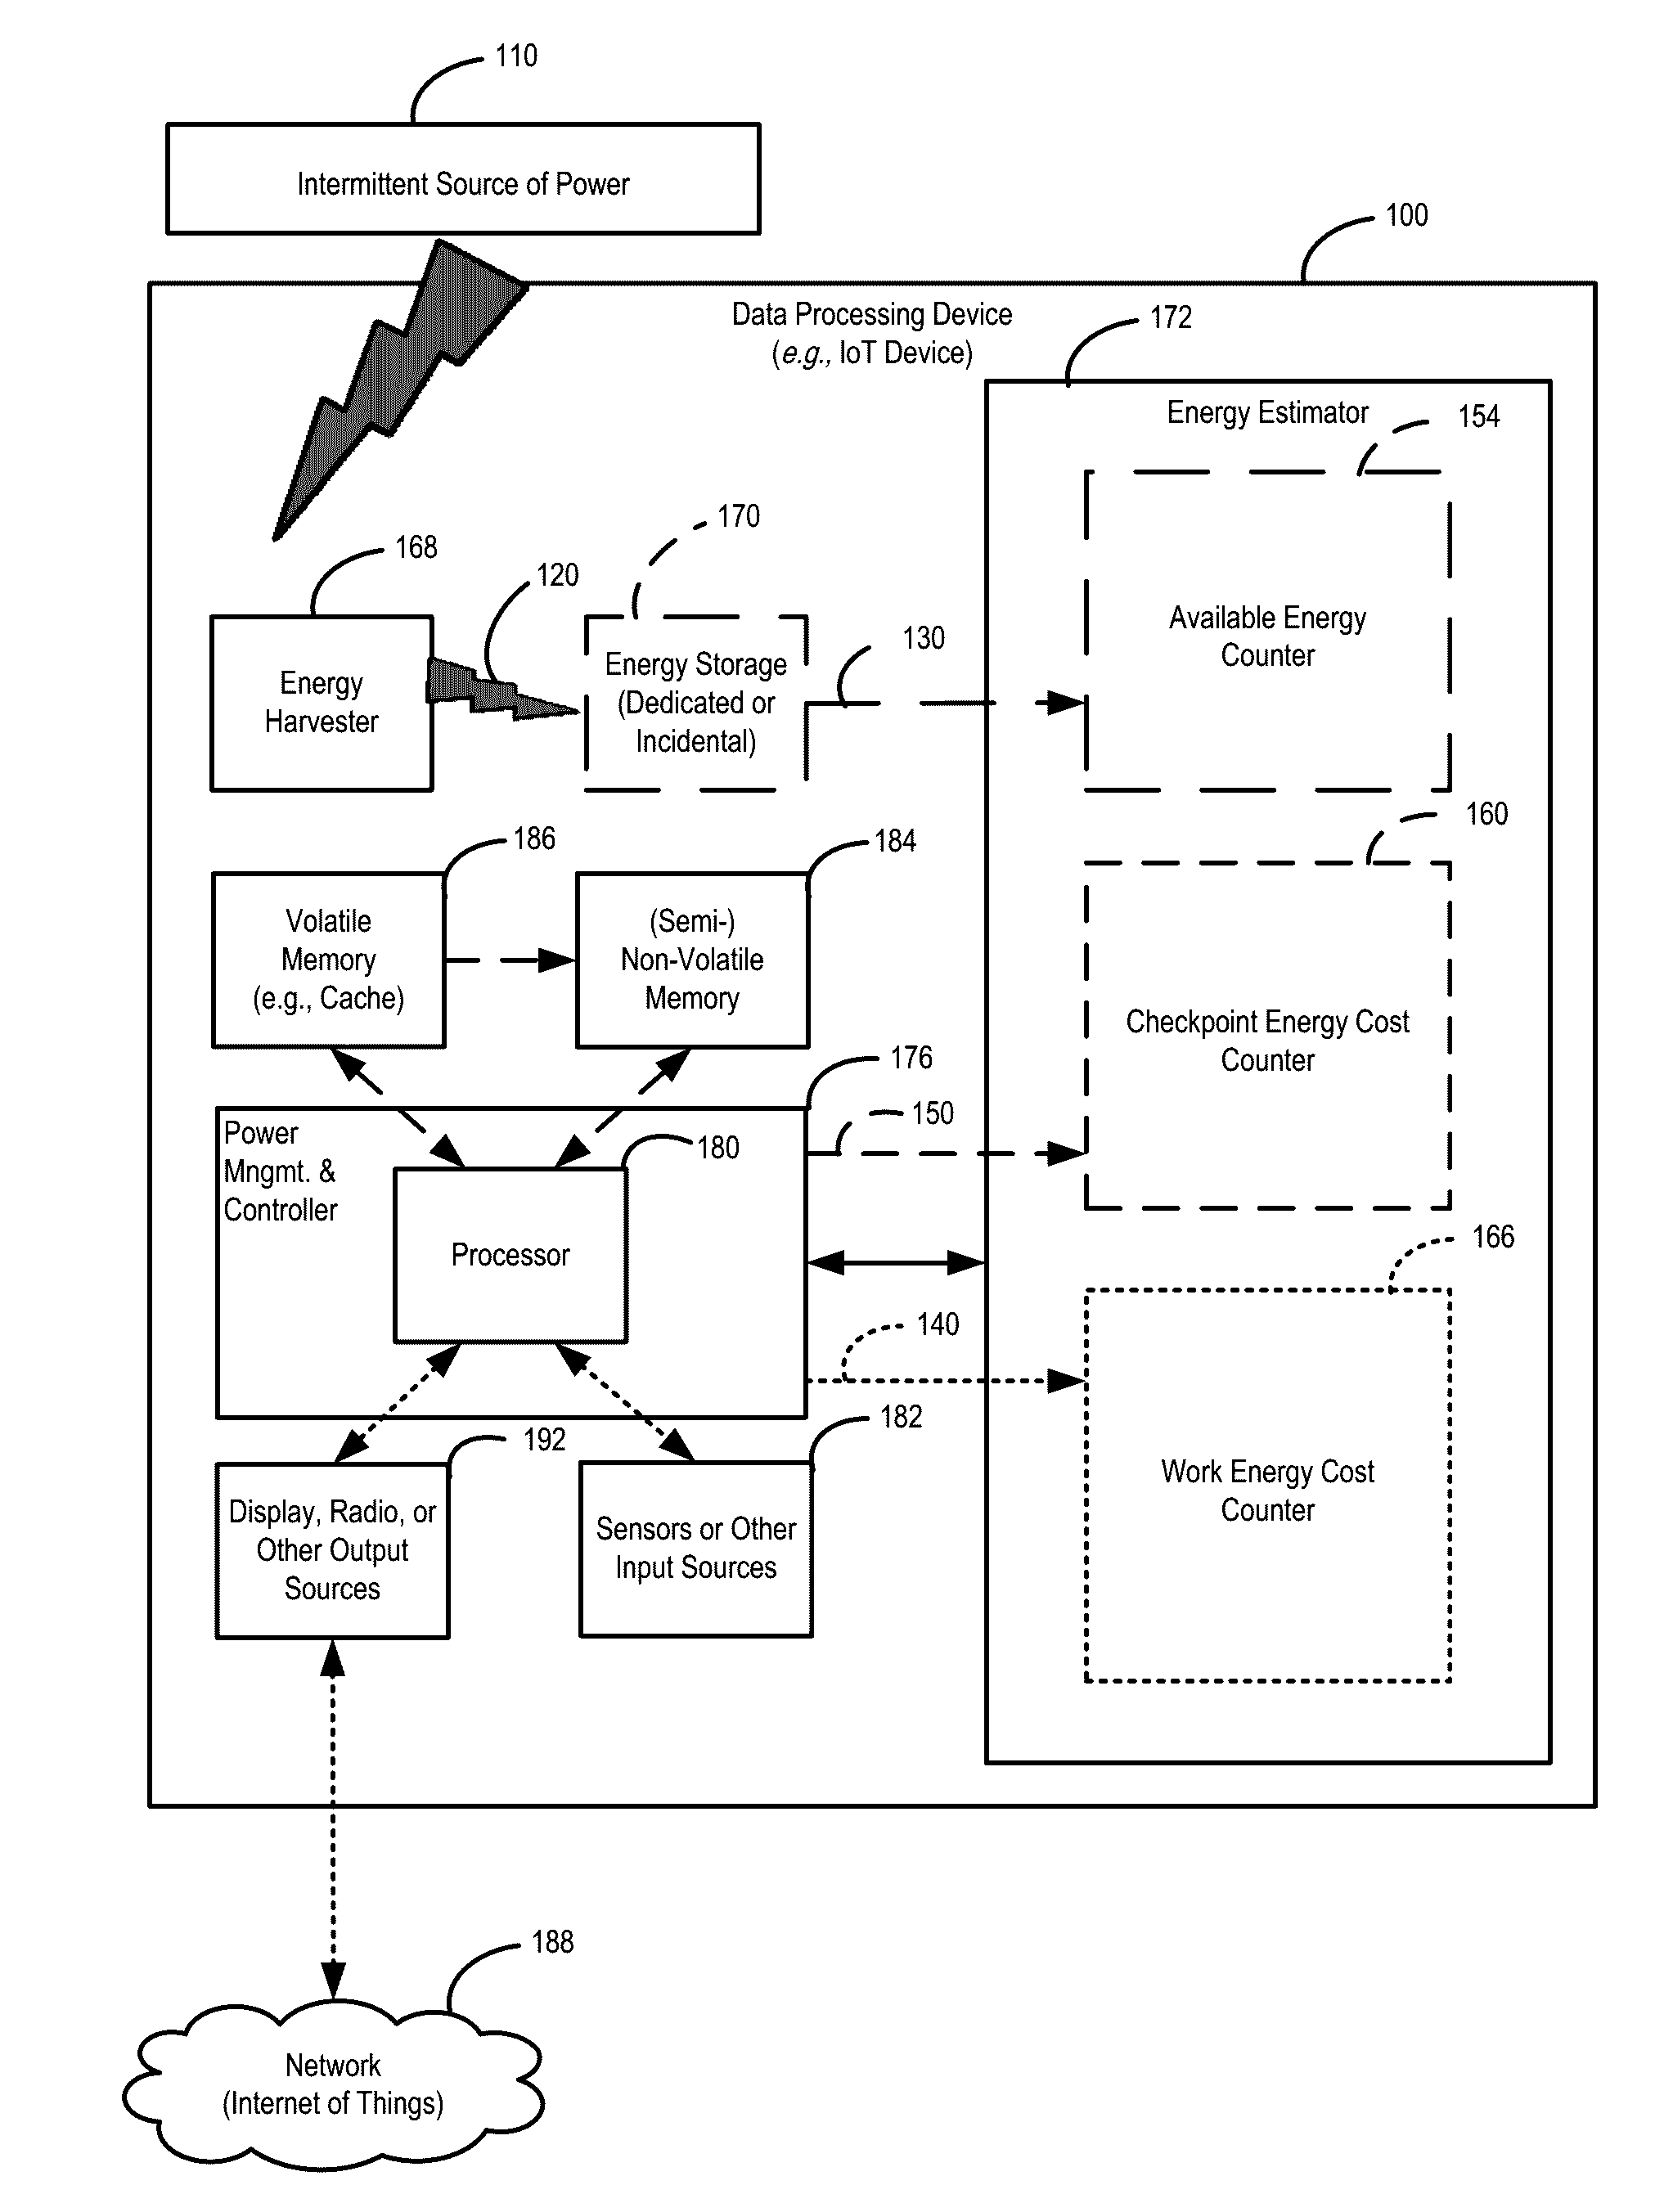 Opportunistic power management for managing intermittent power available to data processing device having semi-non-volatile memory or non-volatile memory